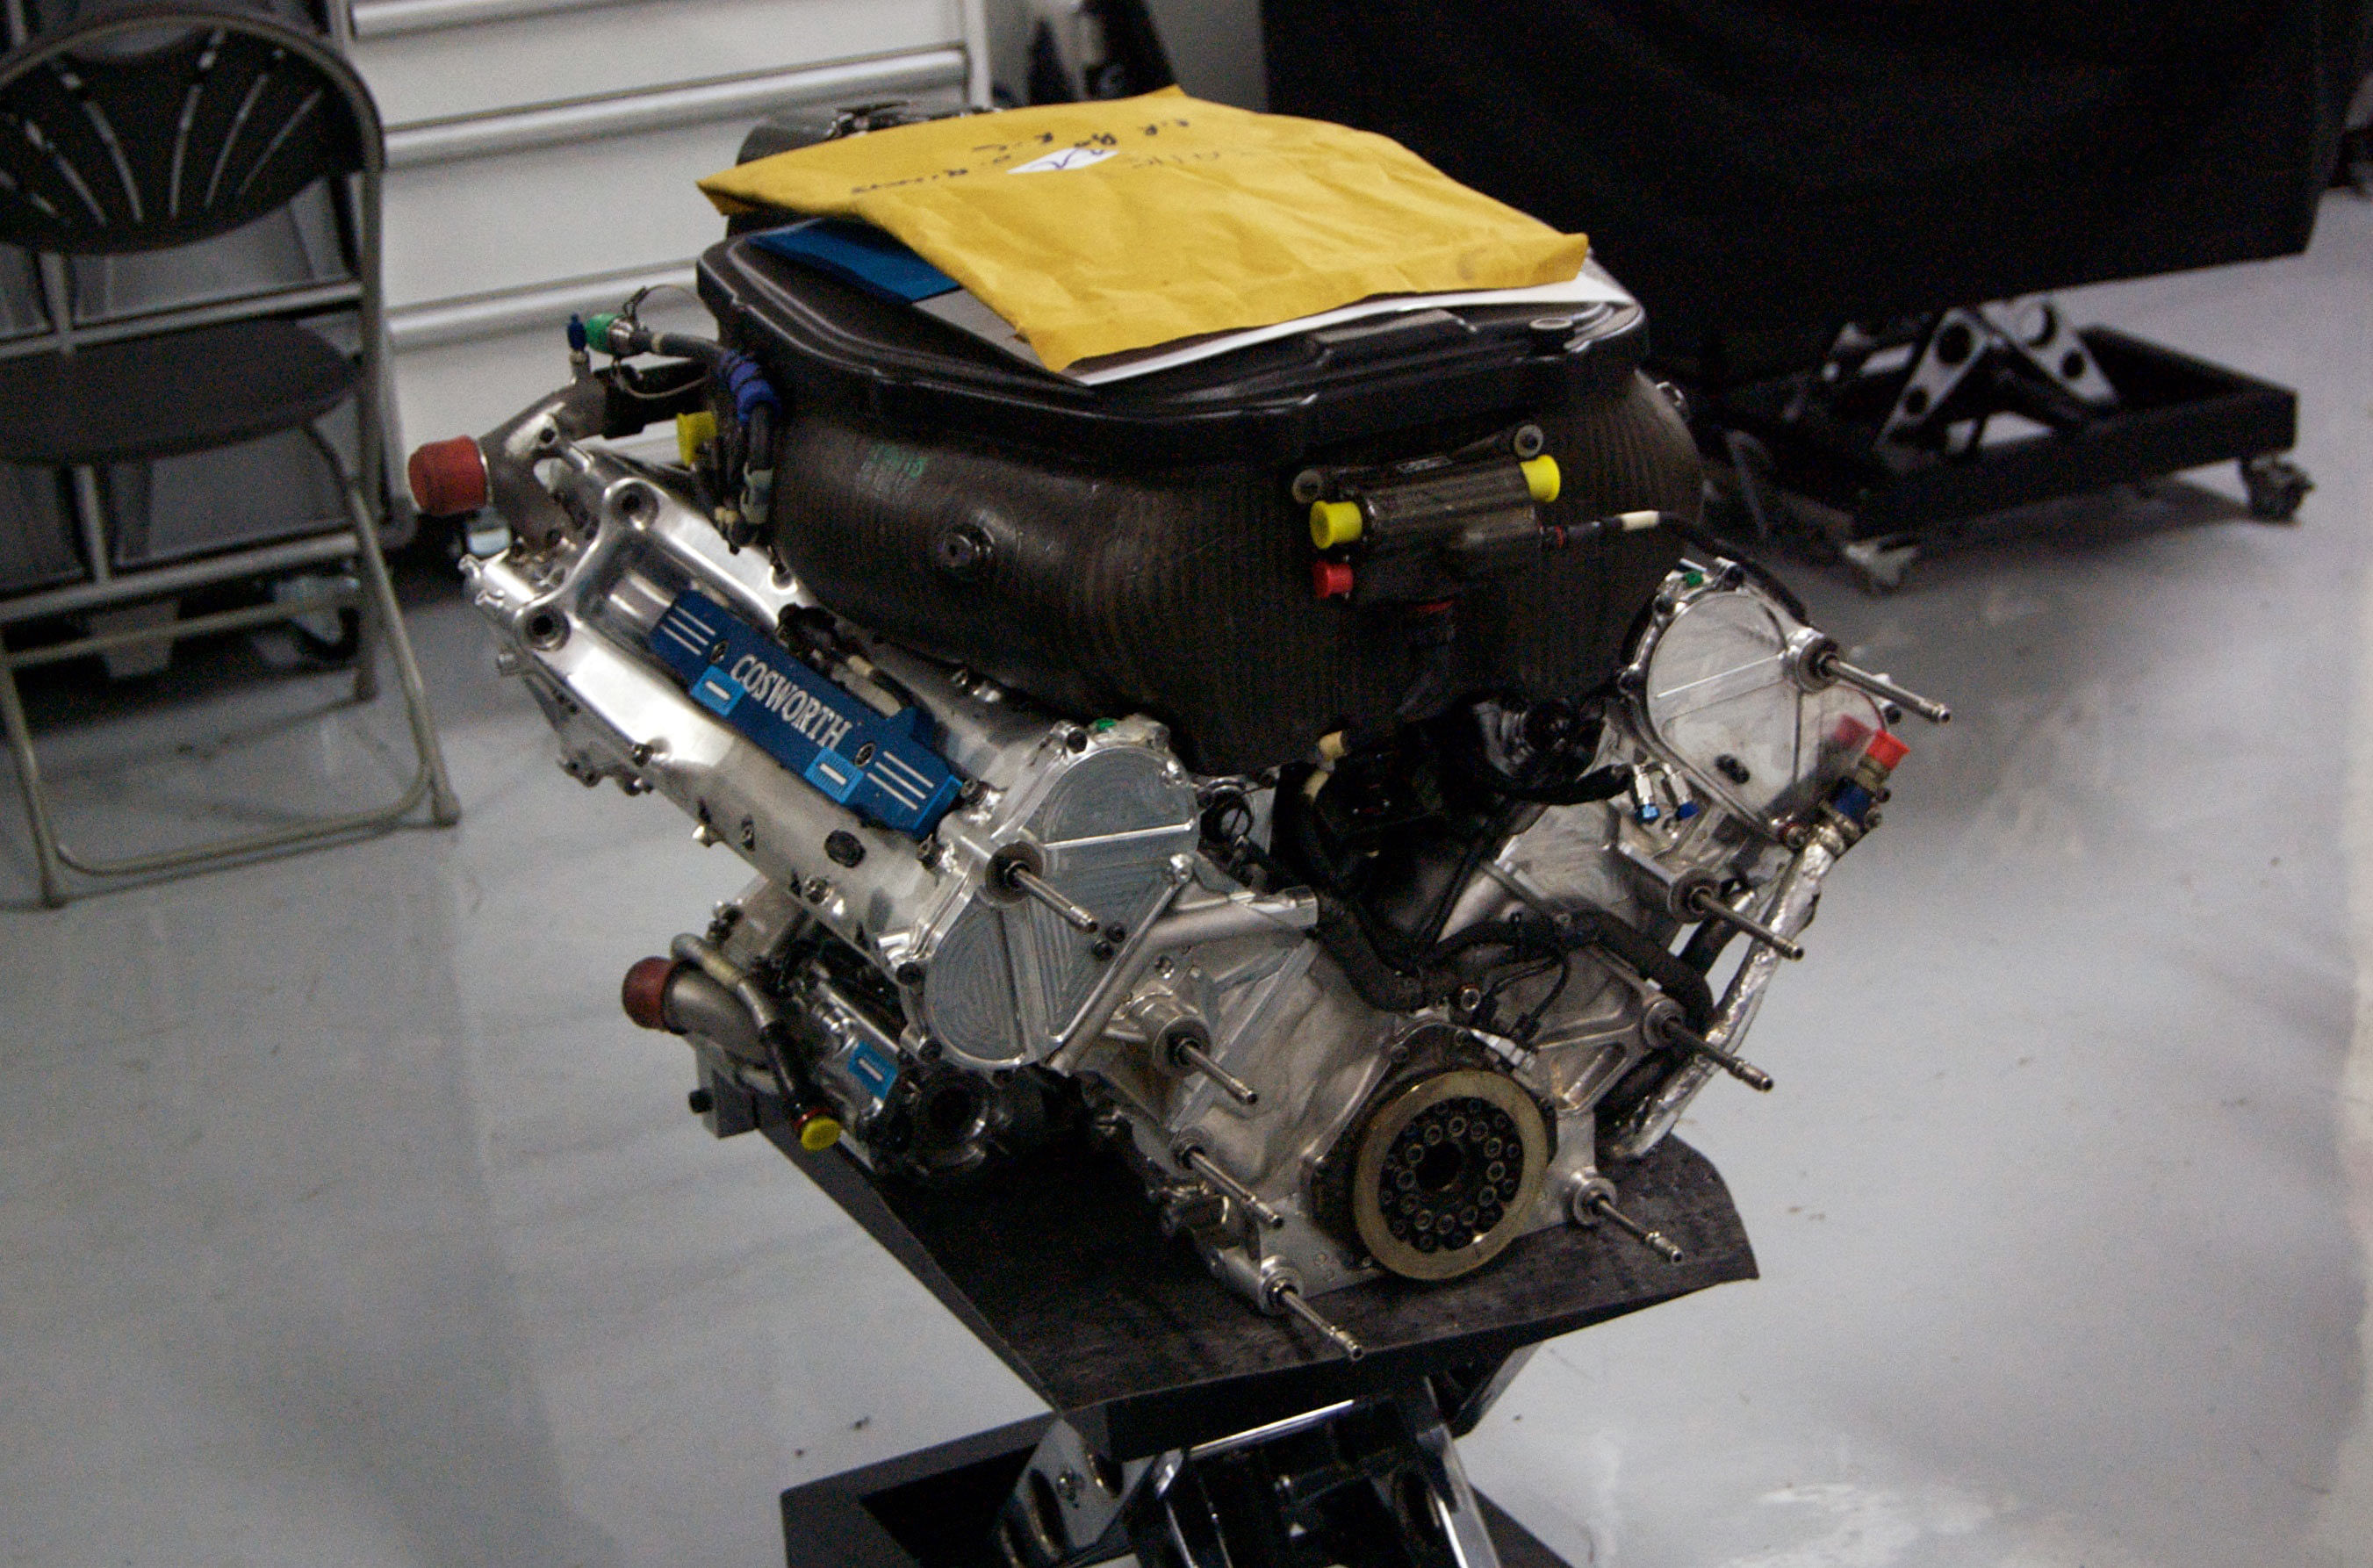 Ford Cosworth F1 engine. Picture credit: www.flickr.com/ John O'Nolan